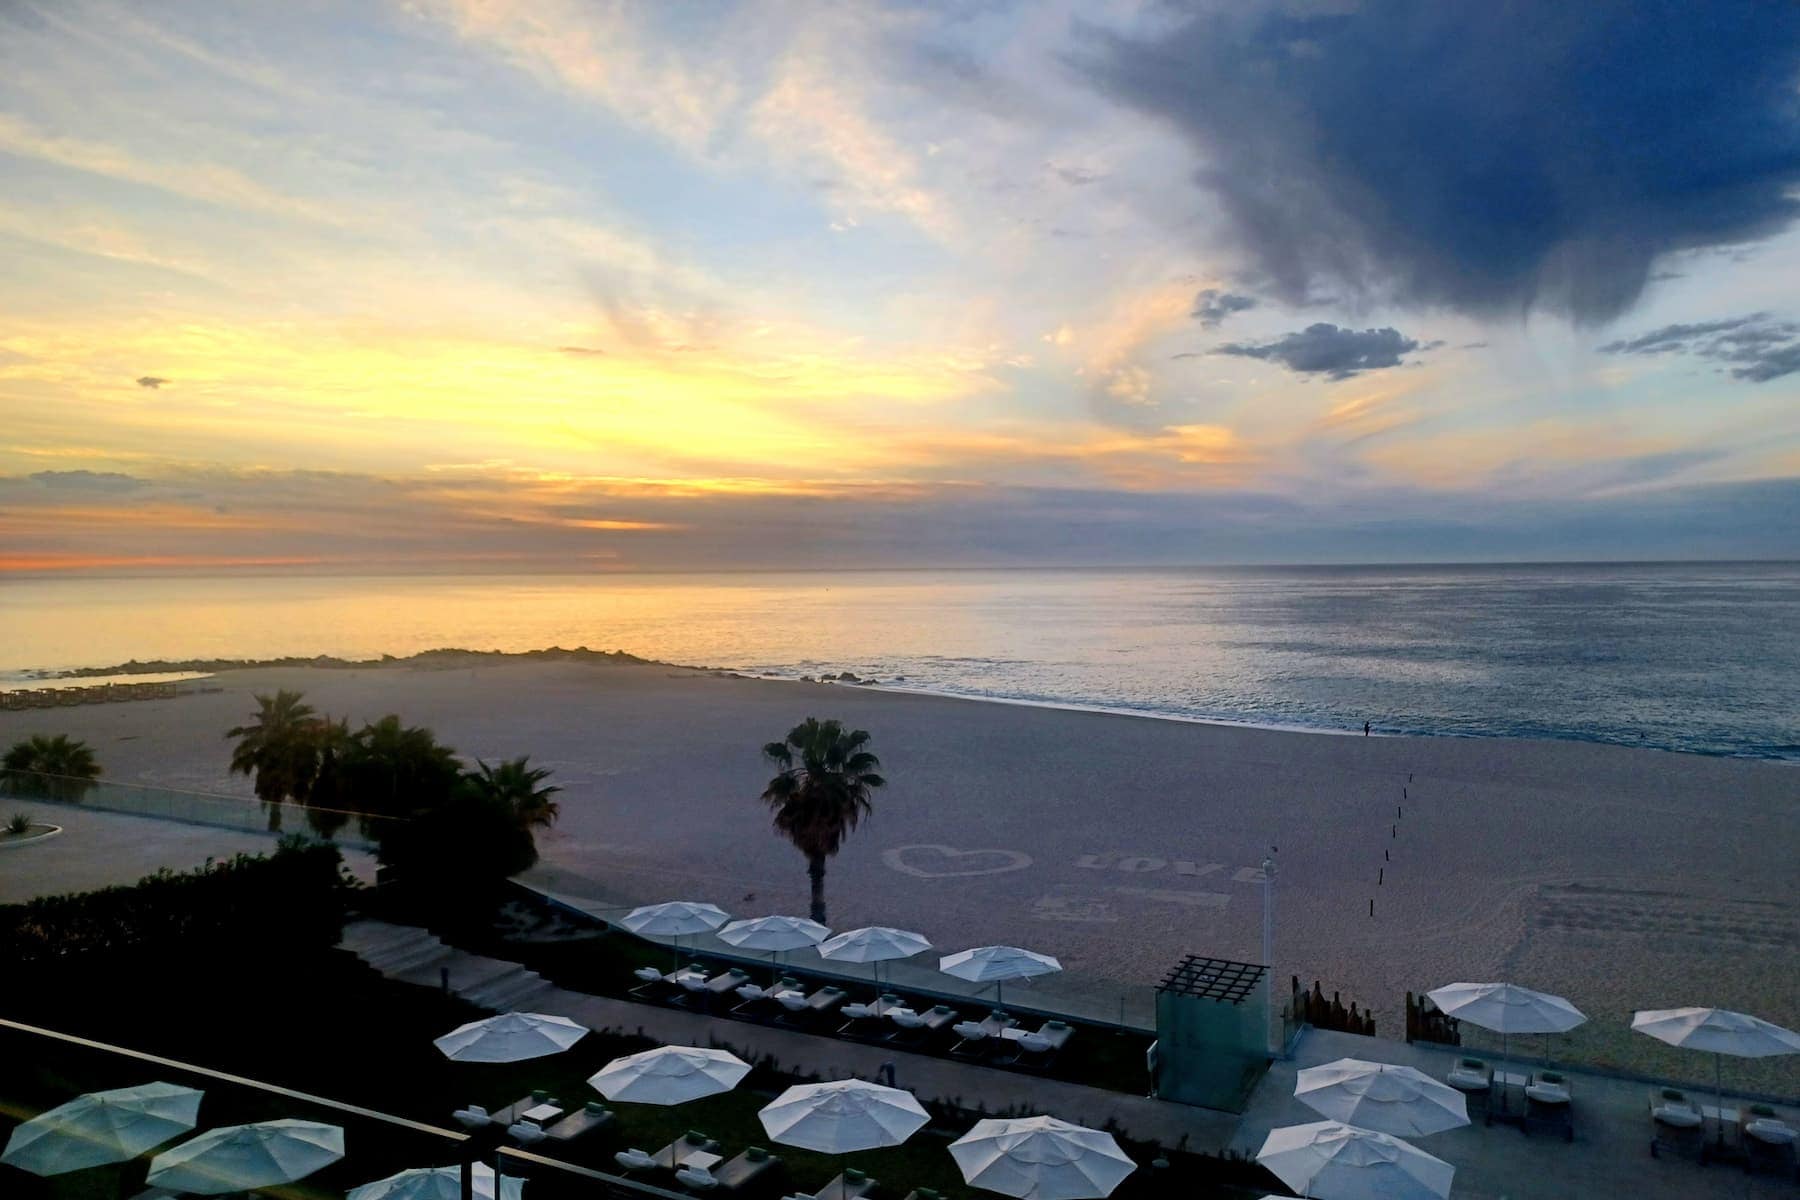 Sunrise from the Hotel overlooking the pool is gorgeous. Photo by Irene Middleman Thomas